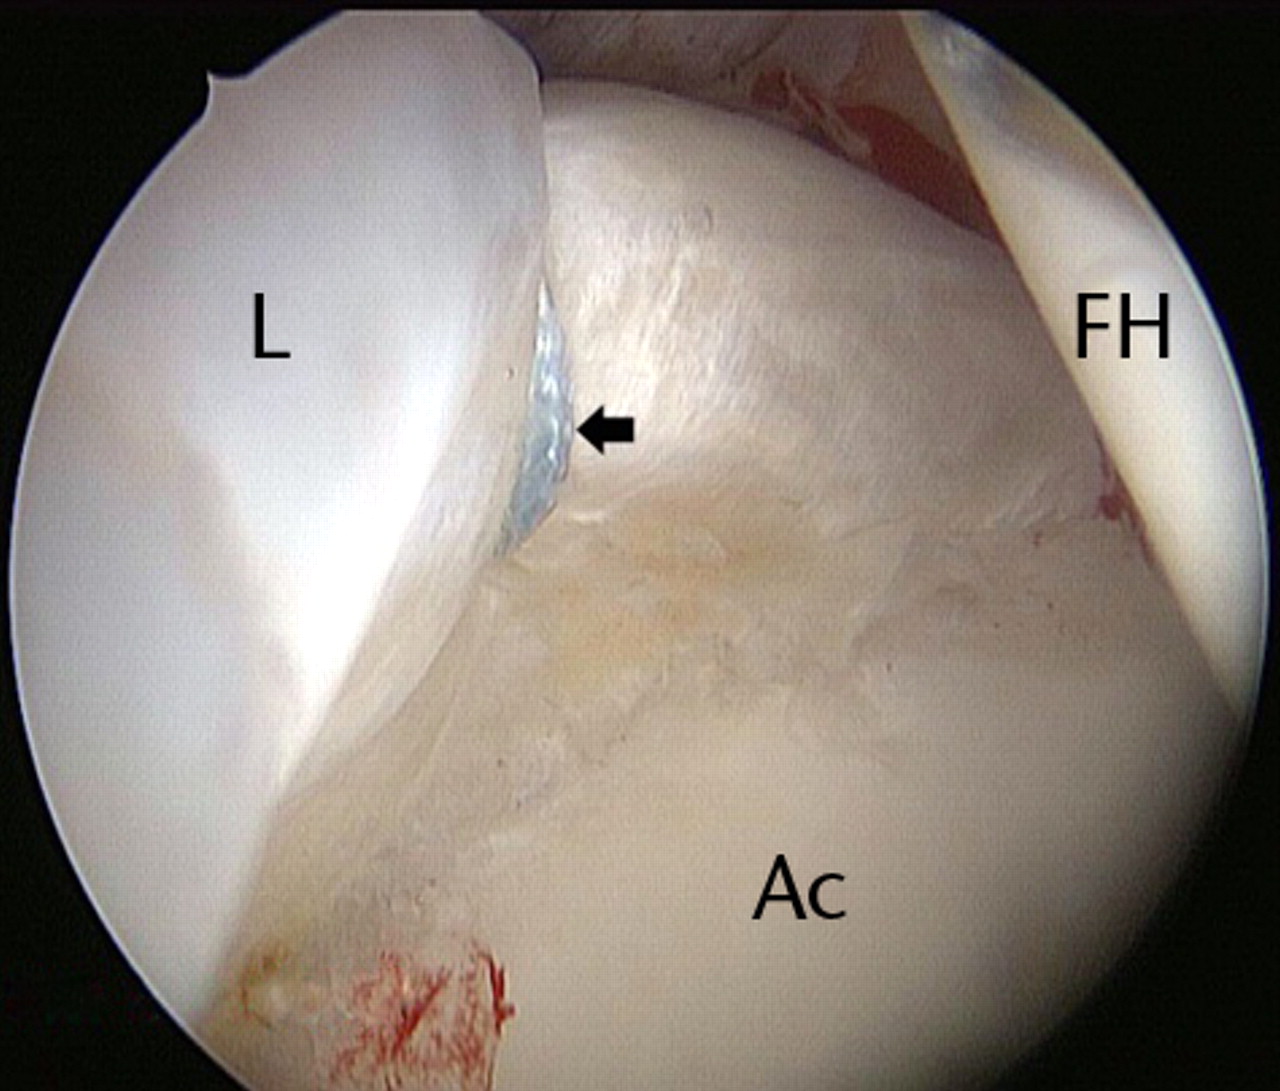 Figs. 2a - 2d 
          Arthroscopic images of the
right hip of a 53-year-old woman with mild dysplasia, showing a)
significant hypertrophy of the anterosuperior labrum, leaving little
room for the 5 mm dilator and guide wire inserted through the anterior
portal, b) the radiofrequency ablation probe just interposed safely
between the labrum and the femoral head, c) partial labral detachment
(arrow), and d) improved visualisation after labral repair with
a suture anchor (arrow) (L, labrum; FH, femoral head; Ac, acetabulum).
        